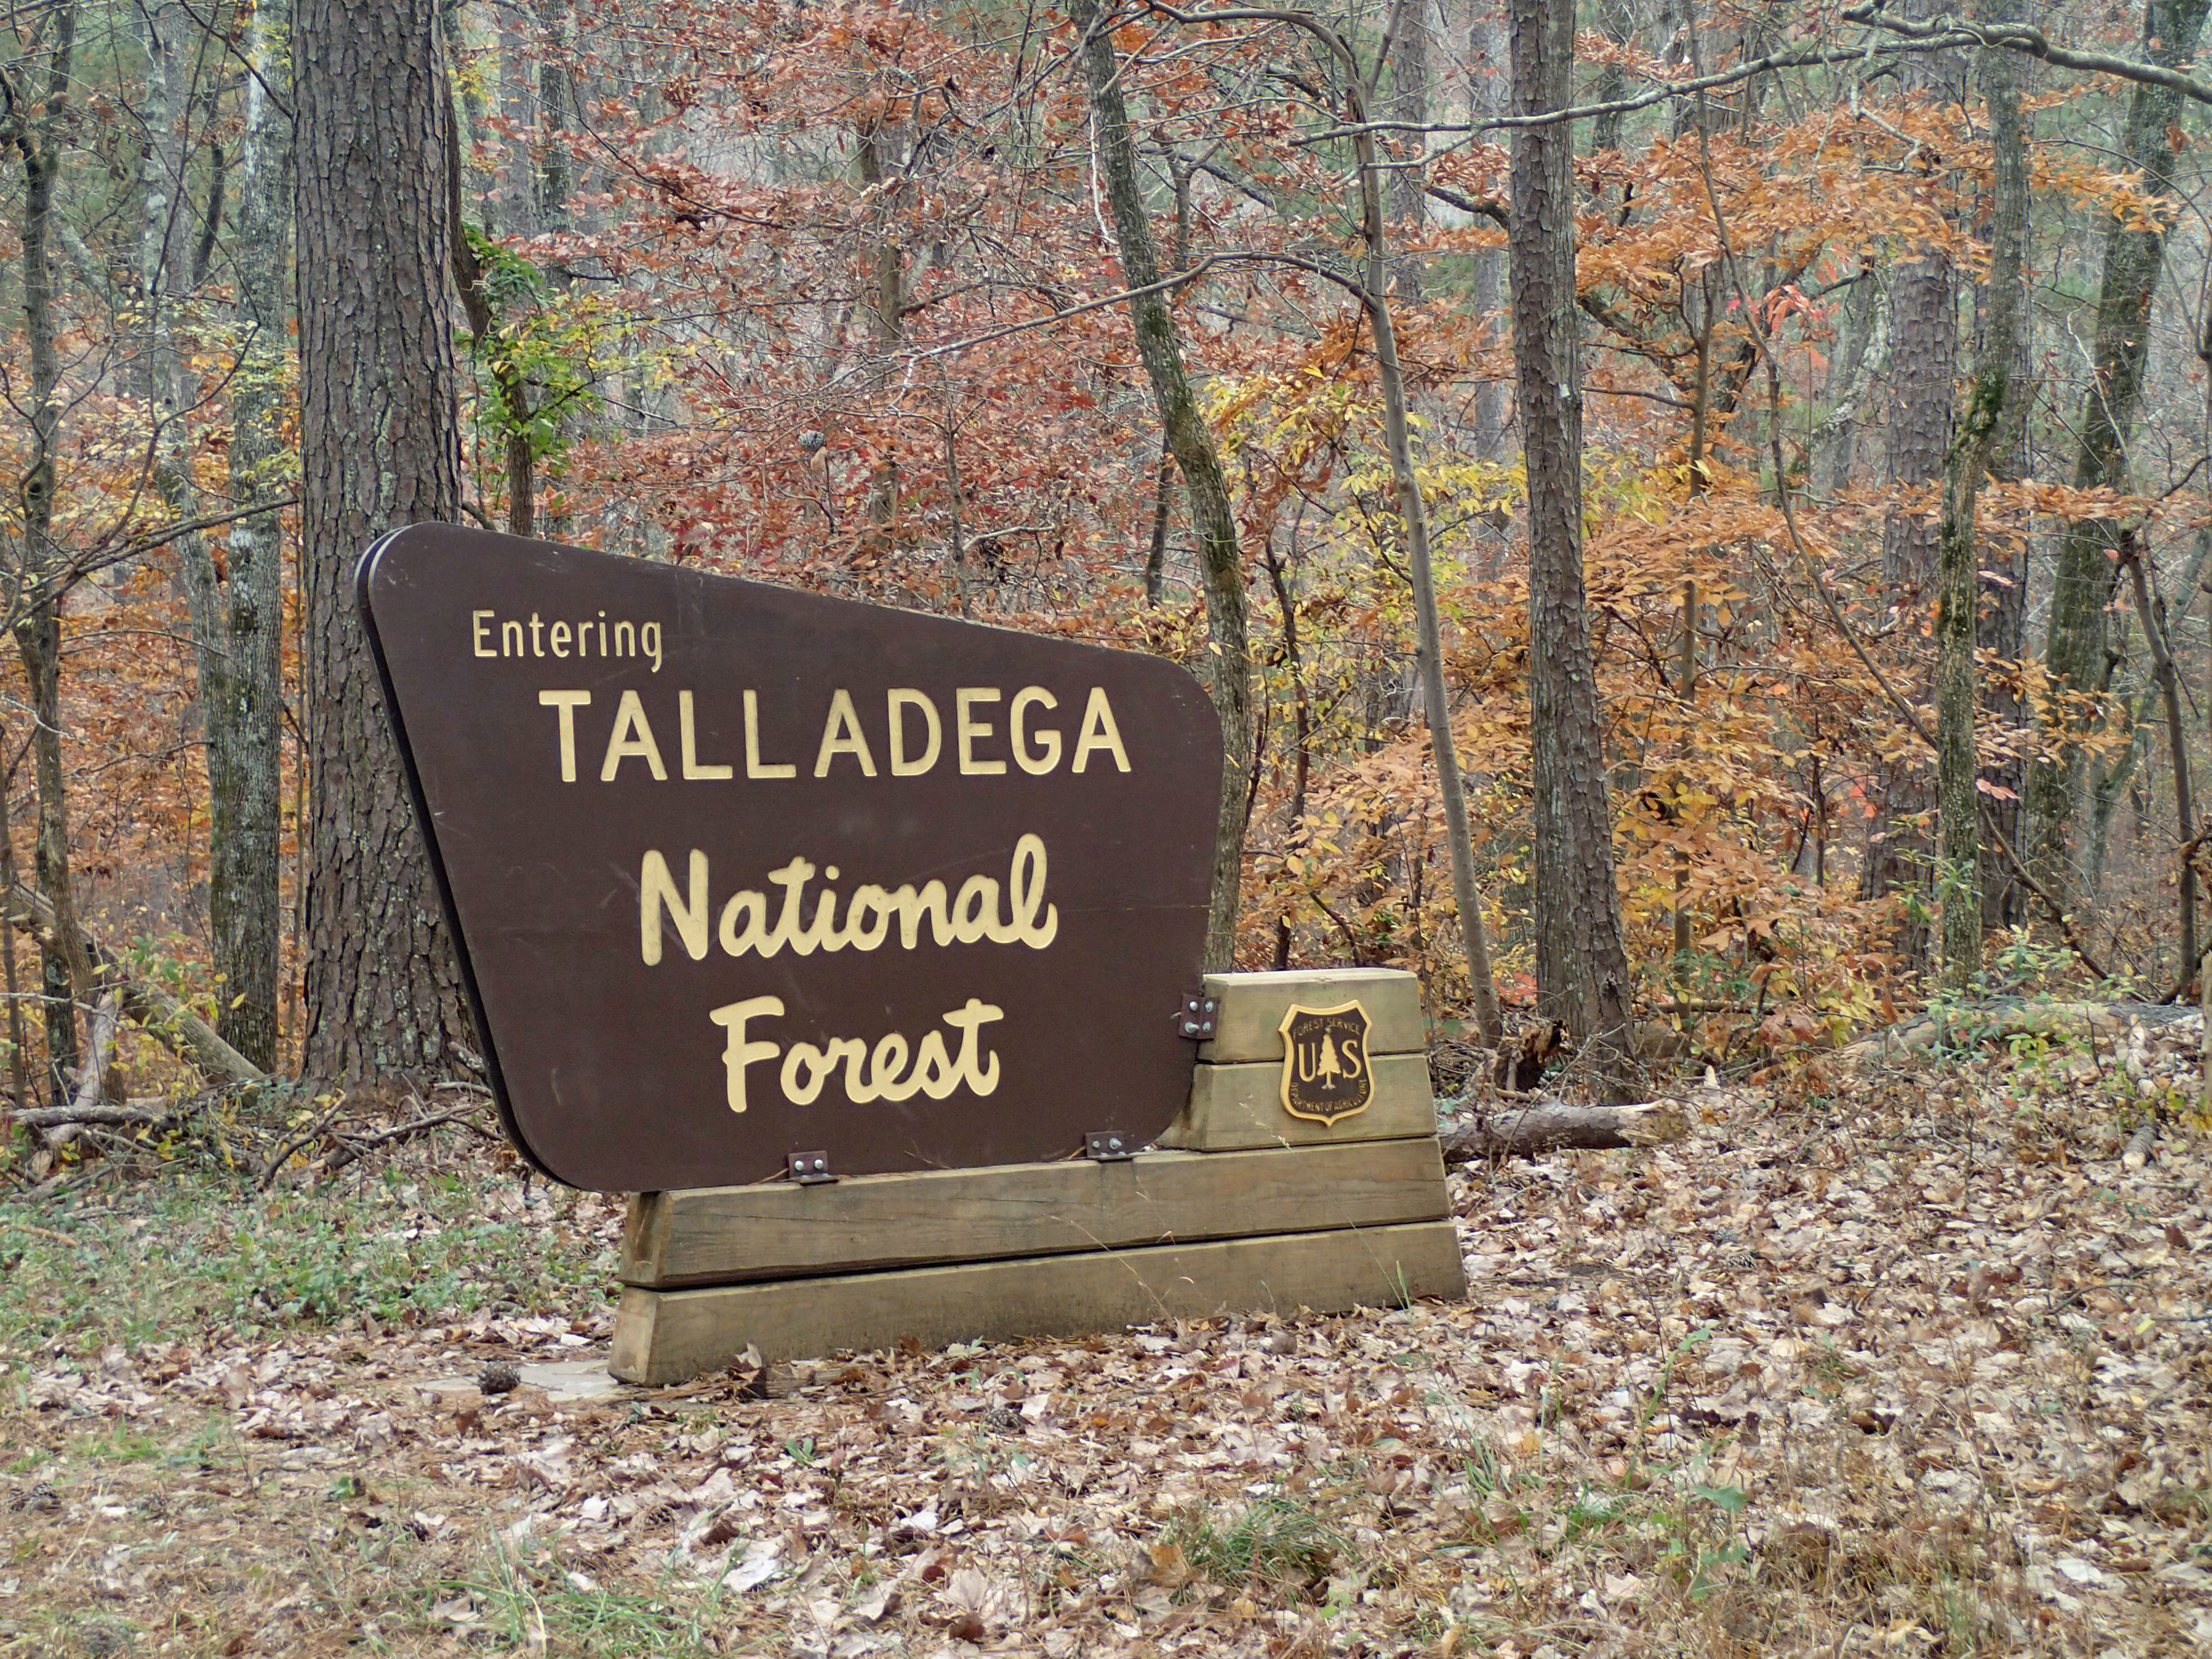 In the east-central sections of the Cotton State, the Talladega National Forest (TNF) covers over 392,000 acres.